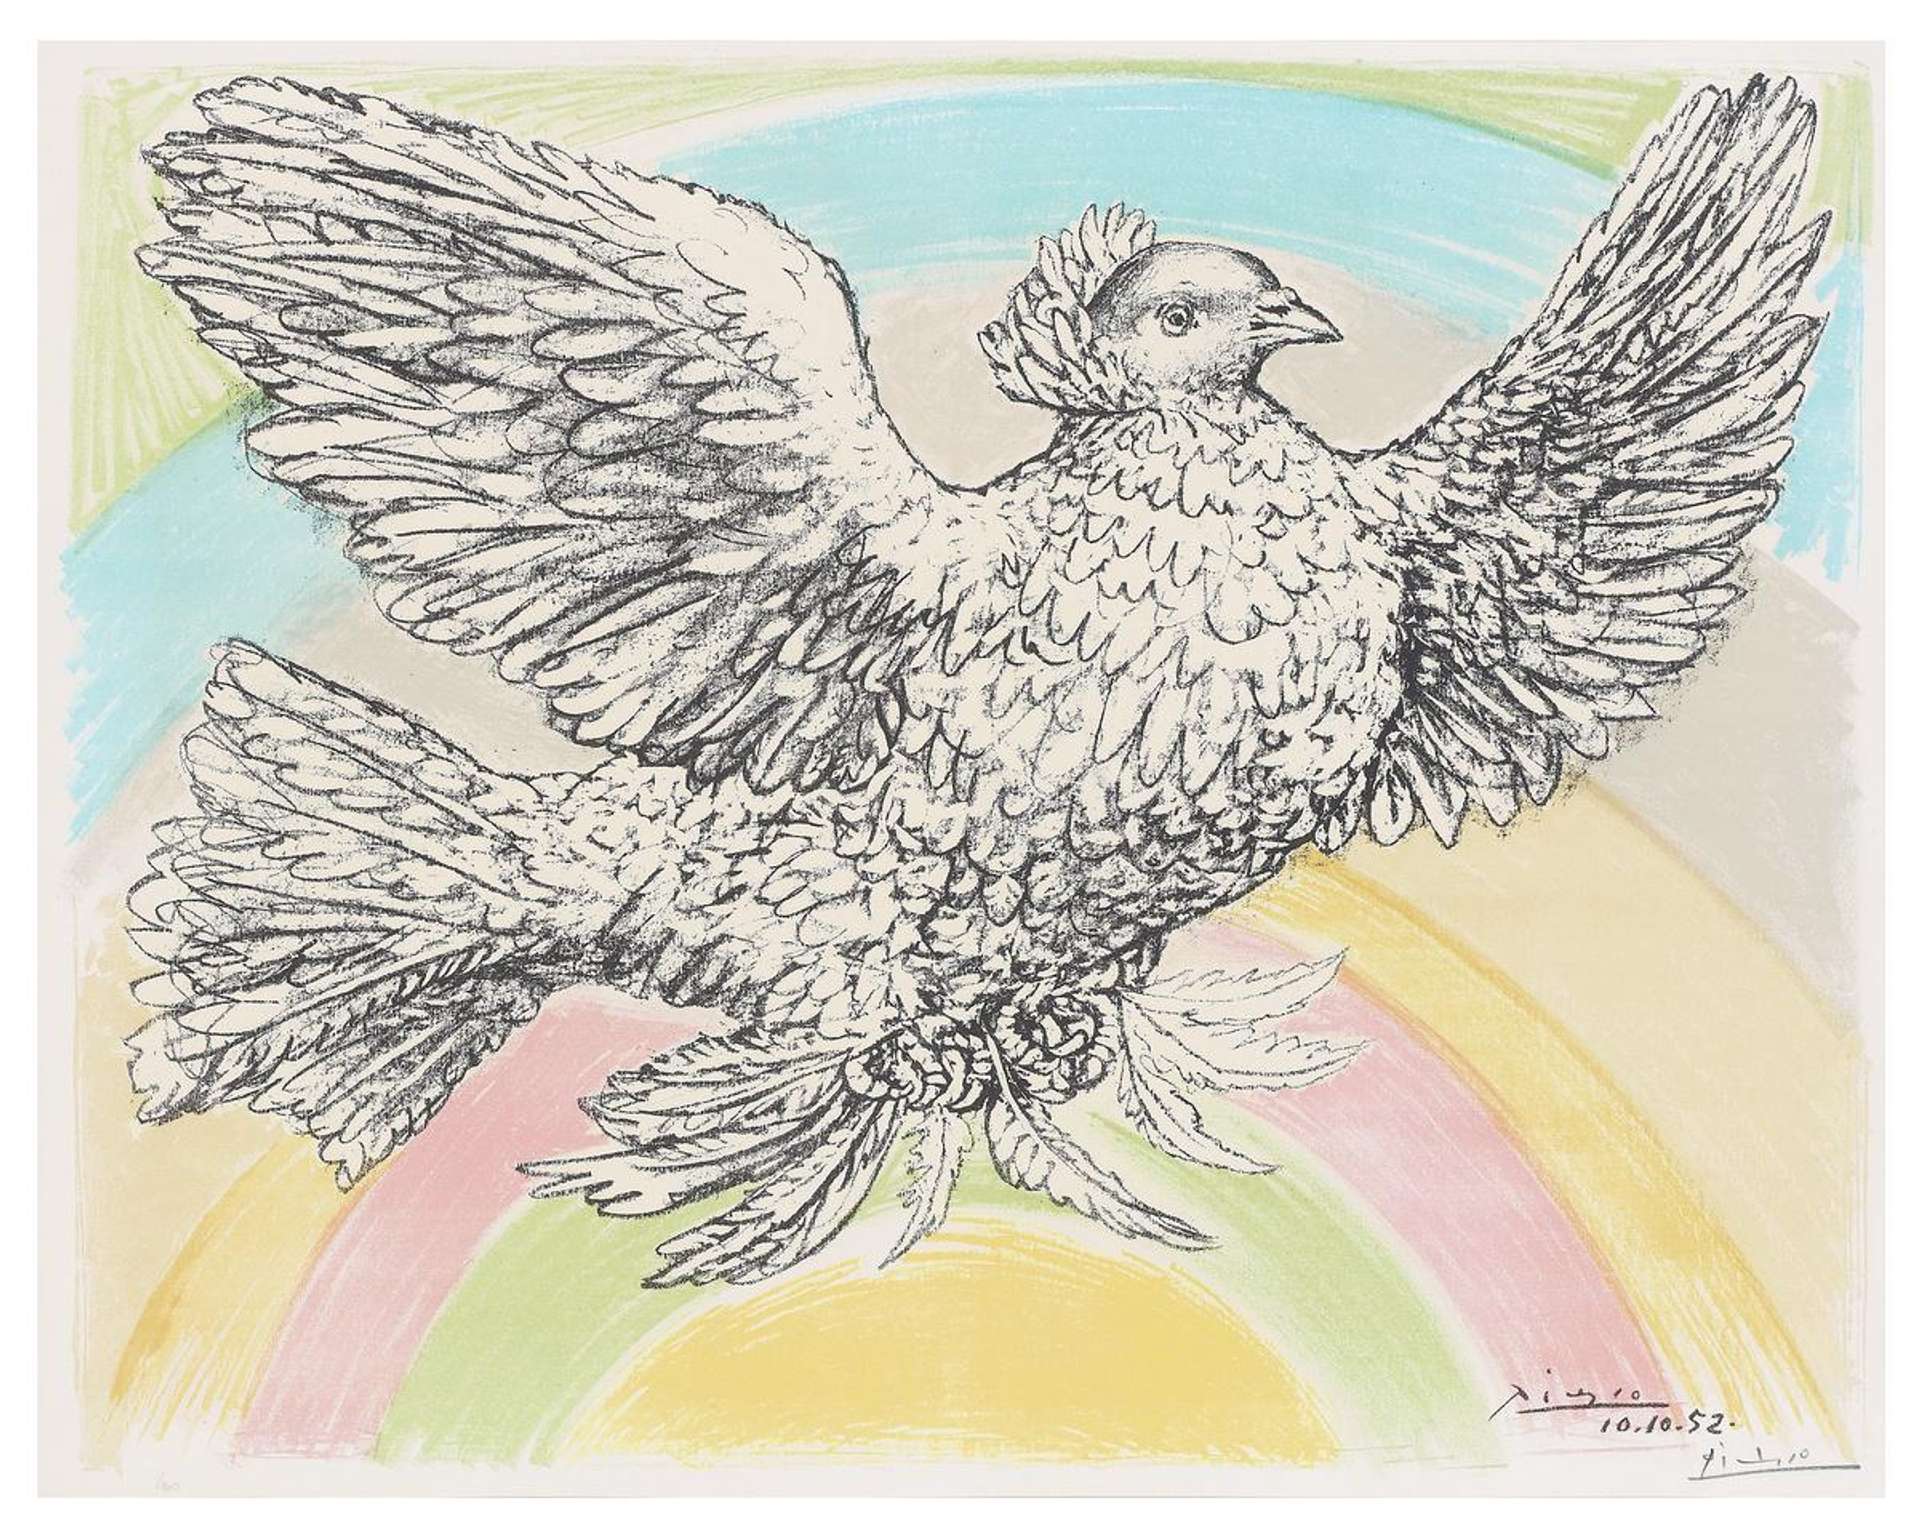 This print by Picasso shows a large white dove against a rainbow background and a blue sky.